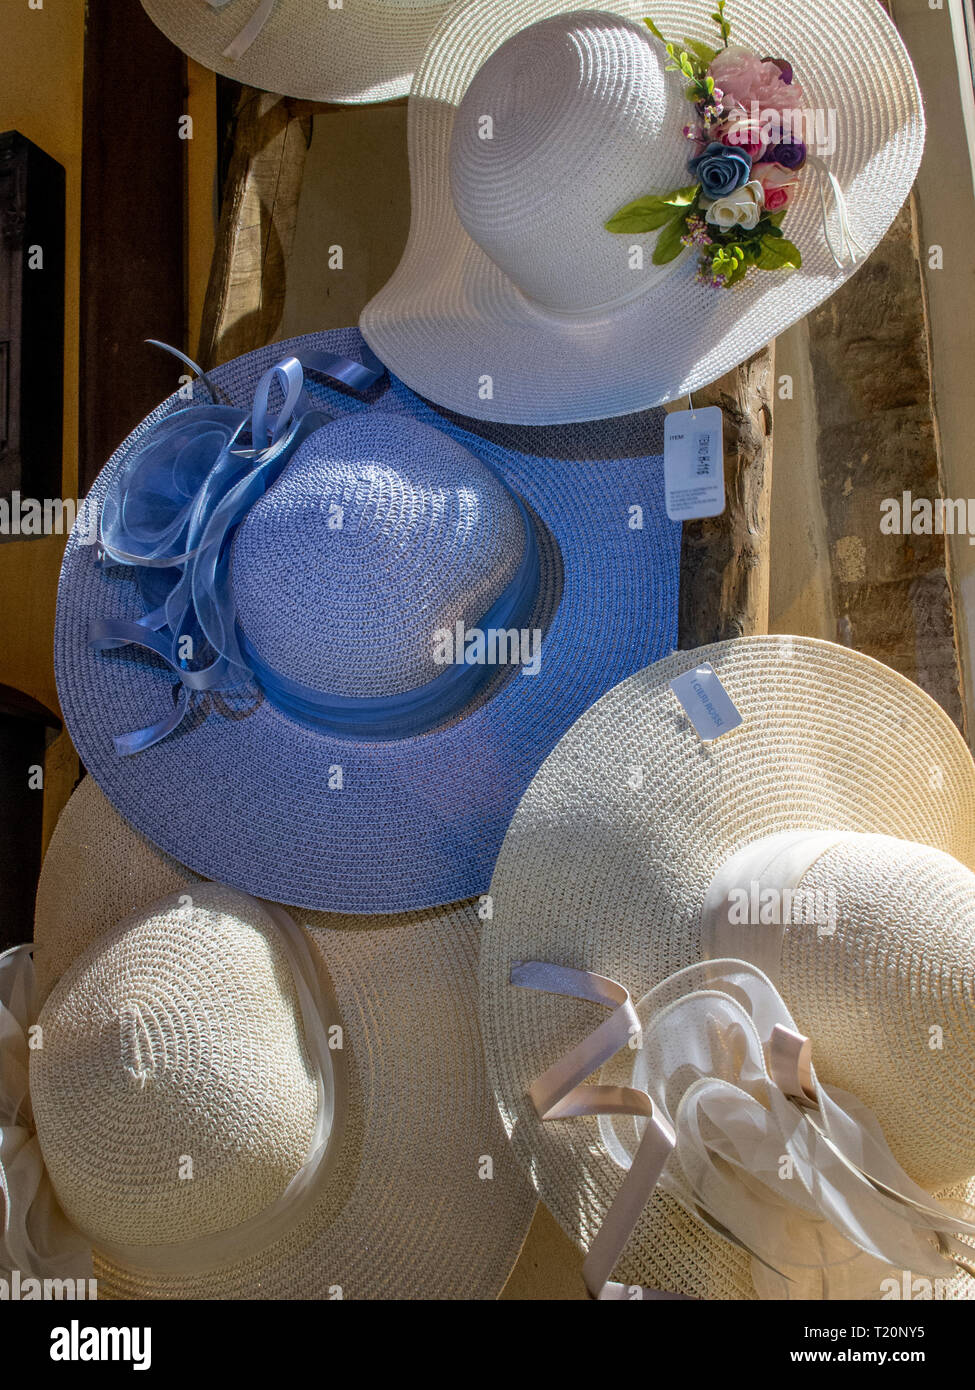 https://c8.alamy.com/comp/T20NY5/handmade-summer-straw-hats-of-various-colors-with-ribbons-and-accessories-displayed-to-the-public-T20NY5.jpg